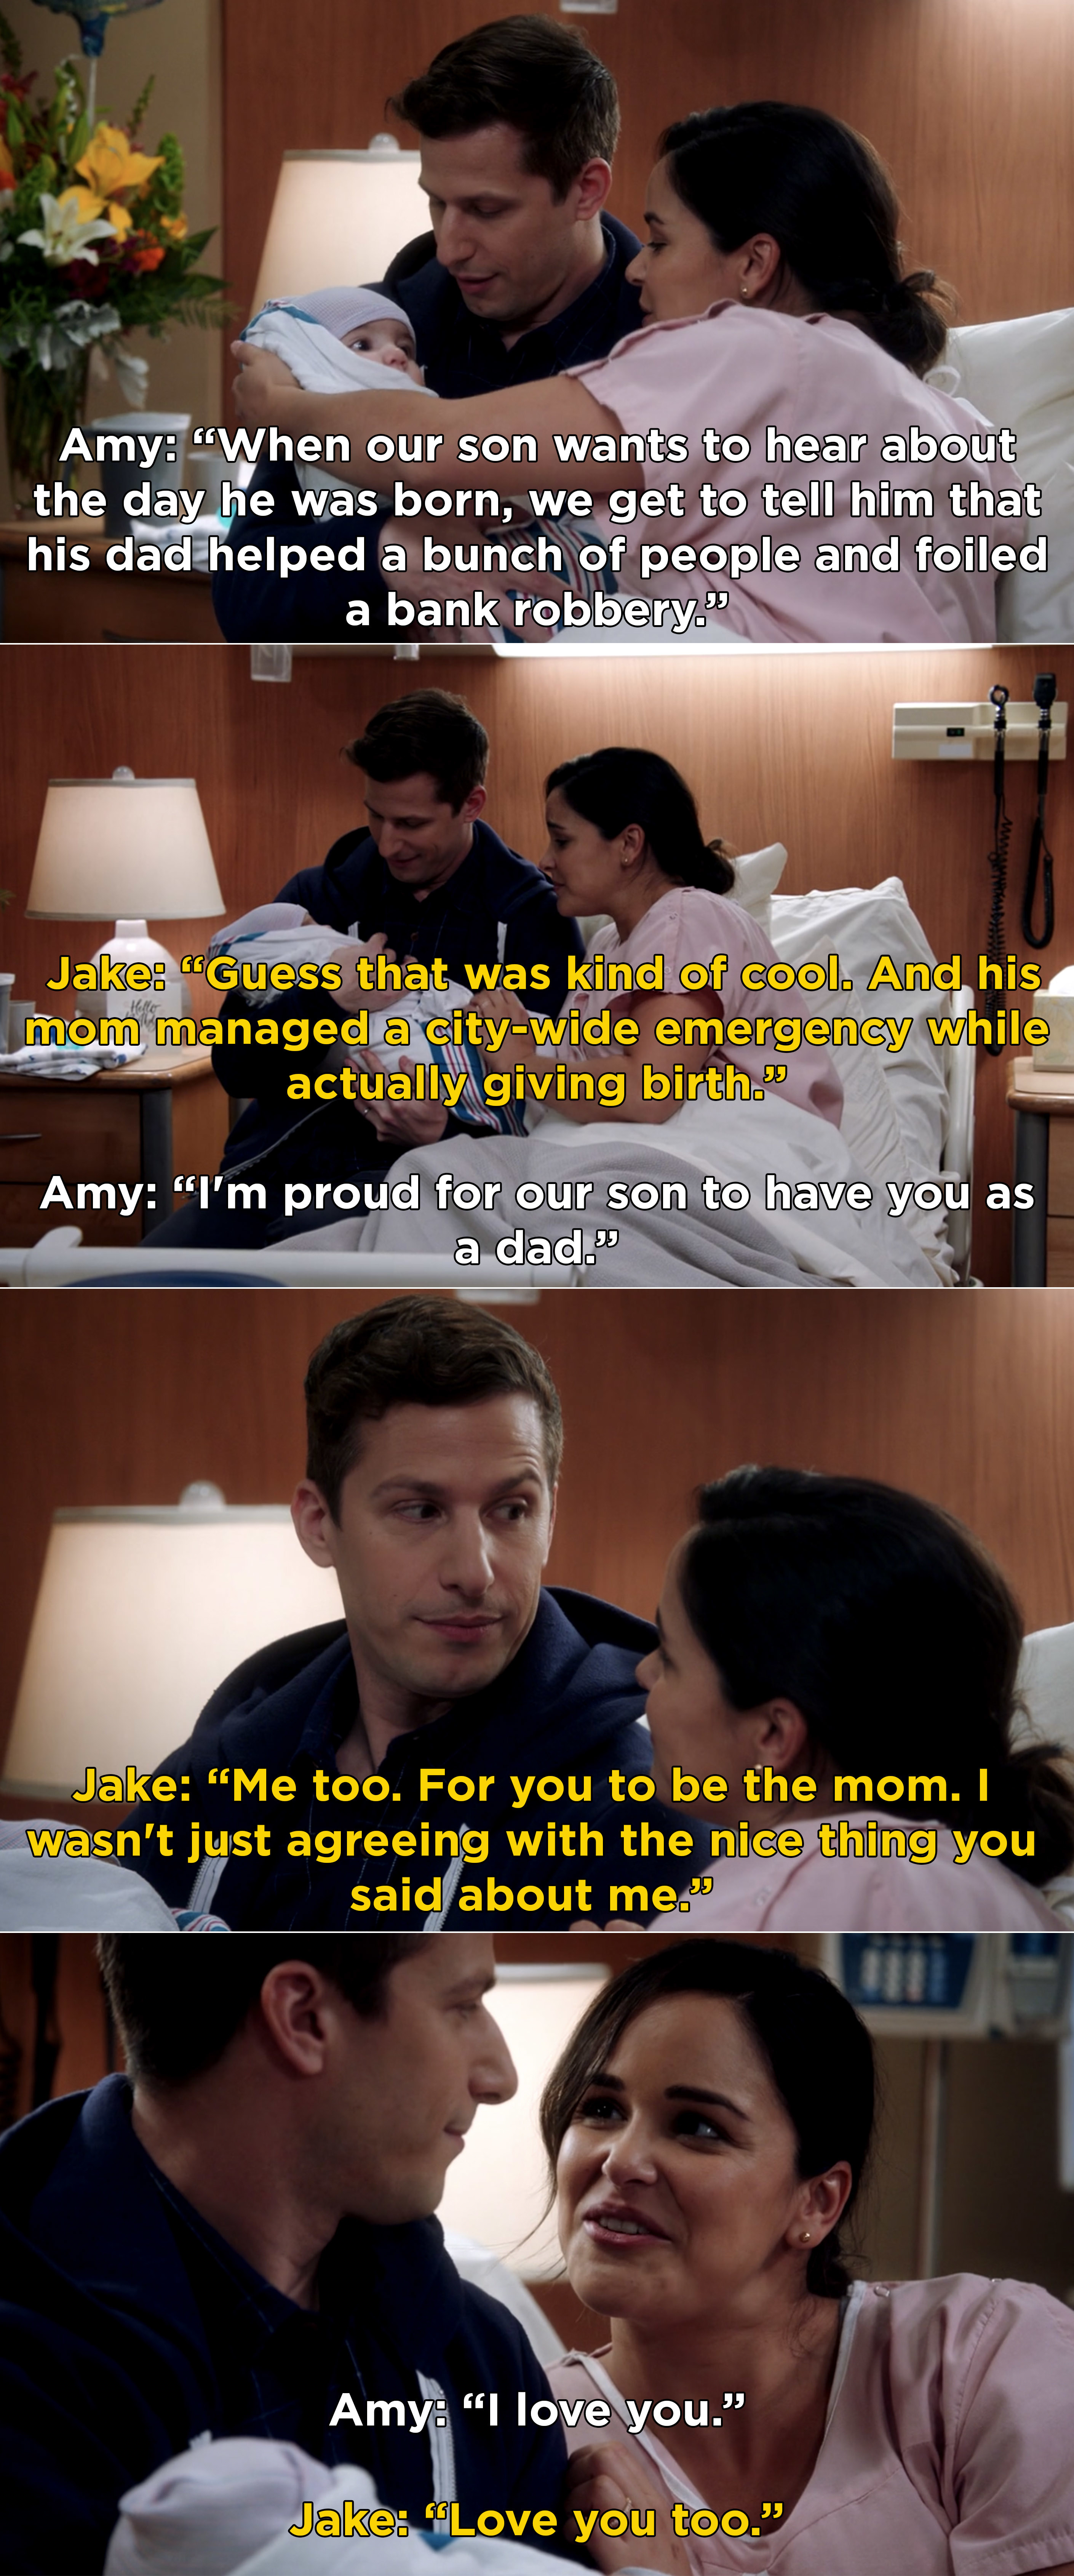 Amy saying that she&#x27;s proud their son has Jake as a dad